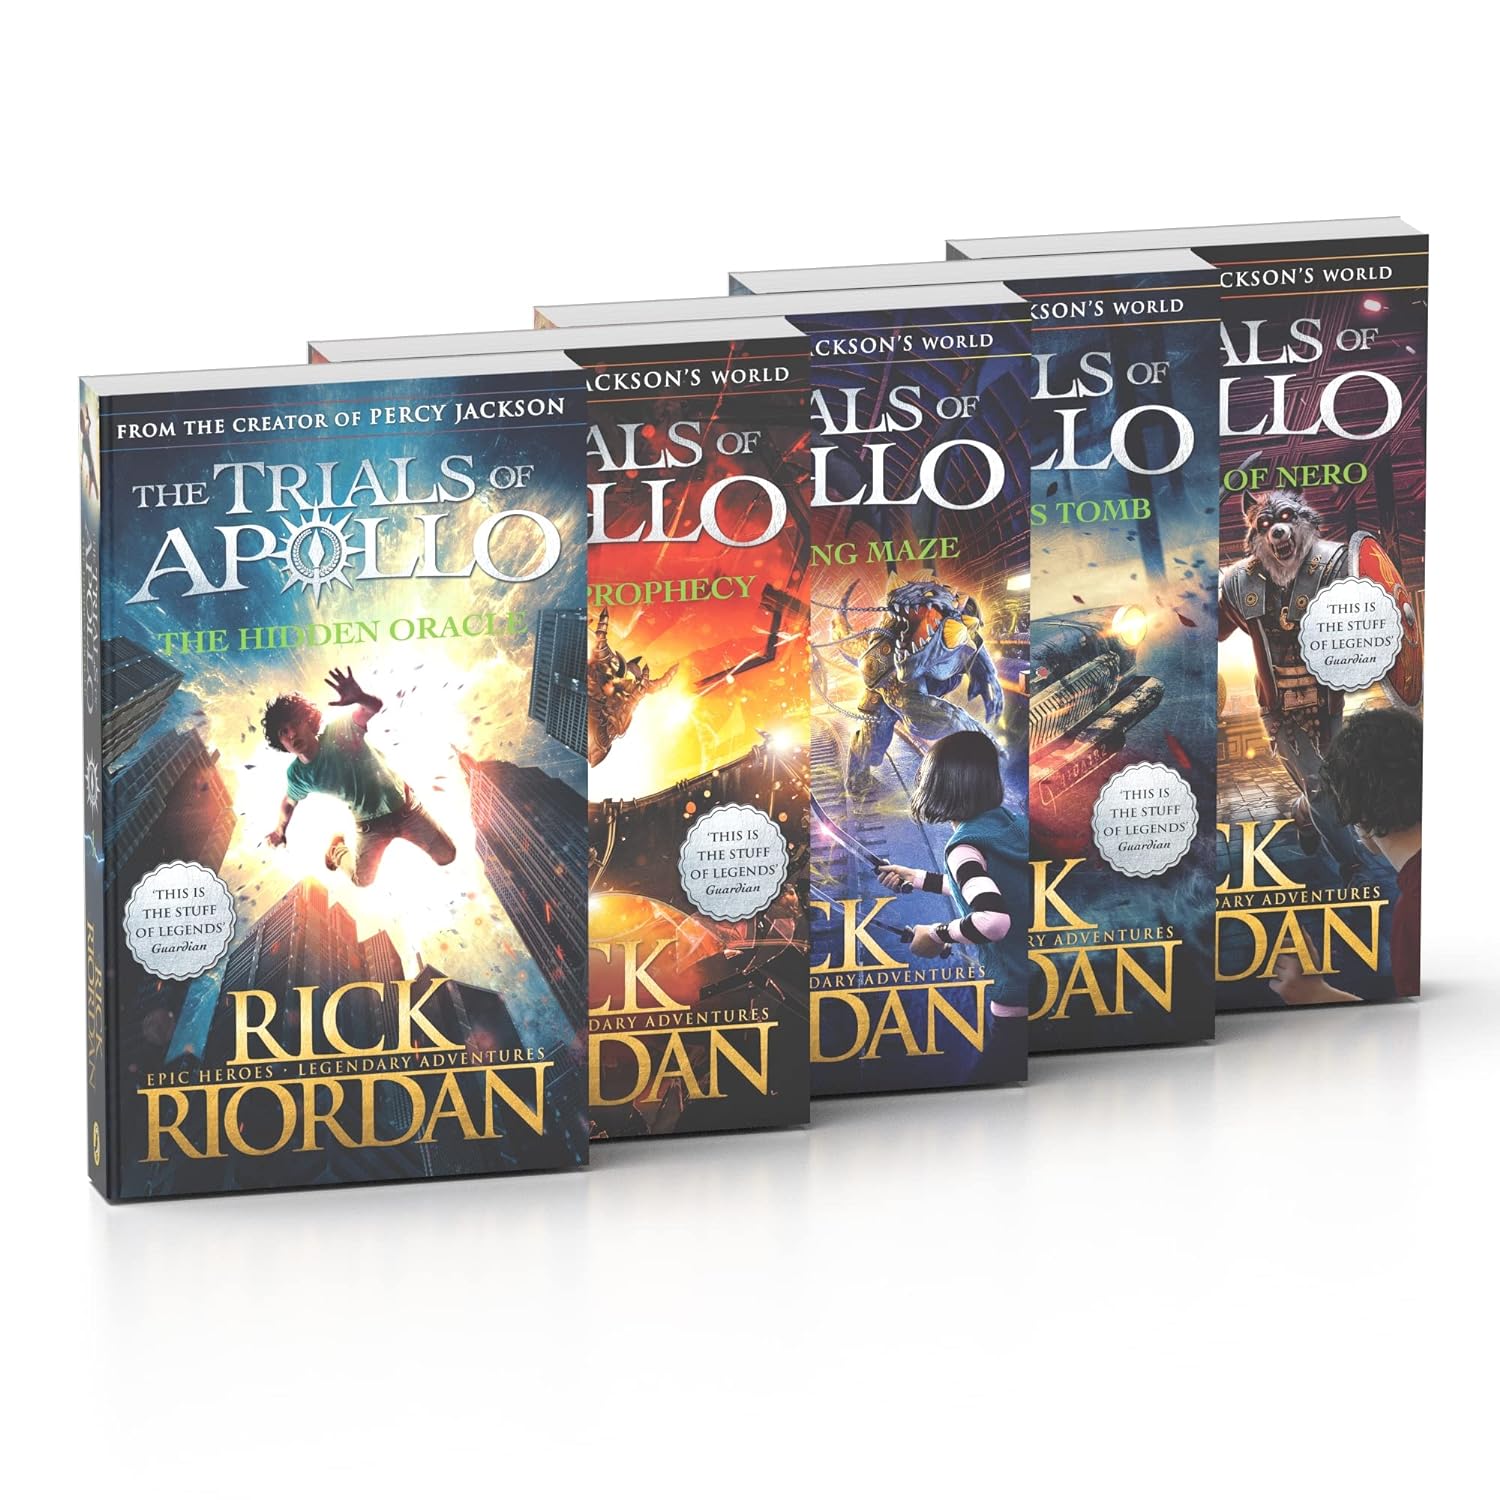 THE TRIALS OF APOLLO: COMPLETE COLLECTION 5 BOOKS SET